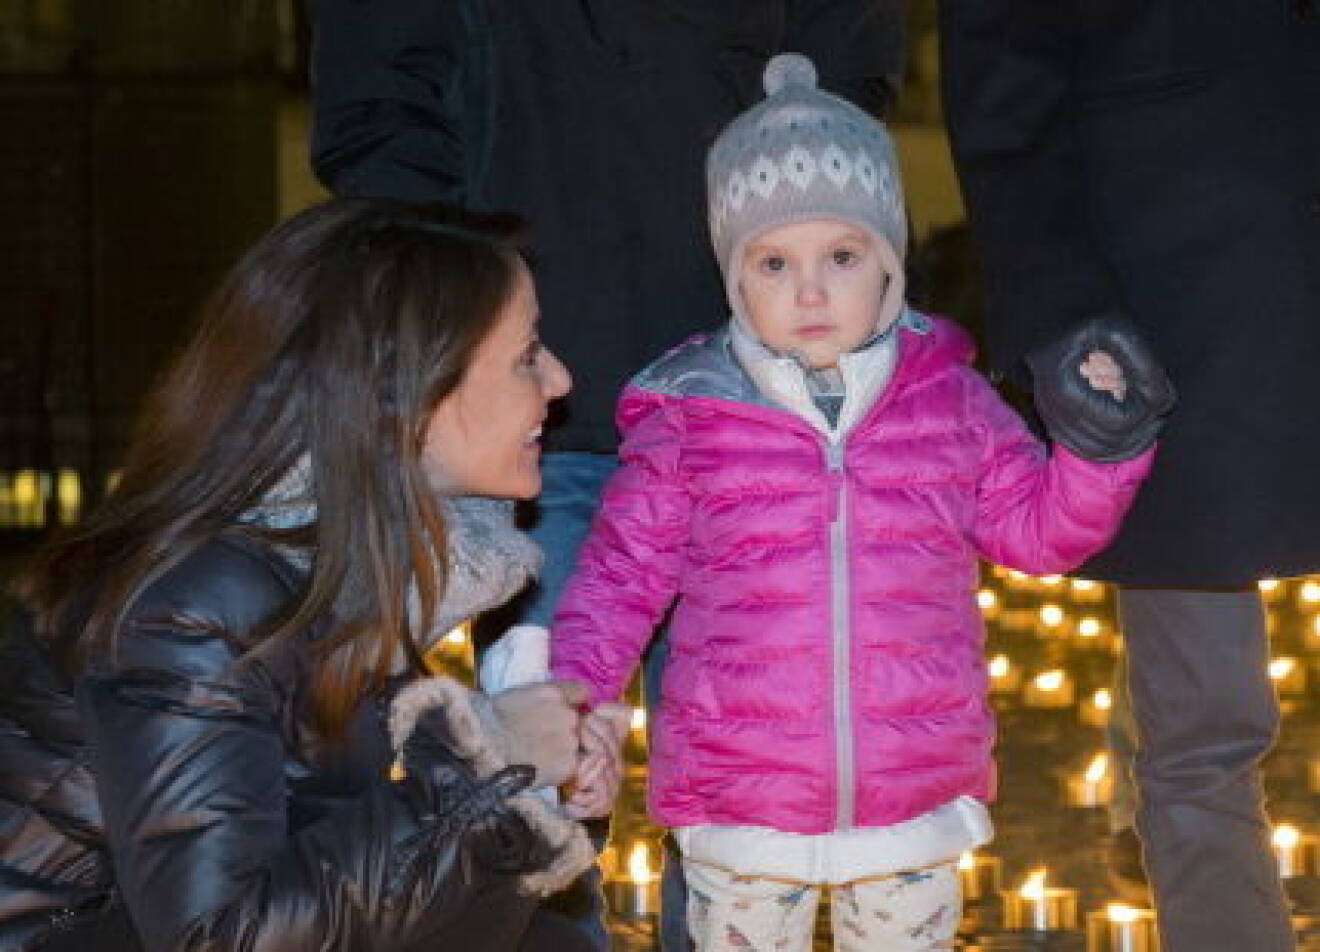 HRH Princess Marie attends World AIDS Day with her children